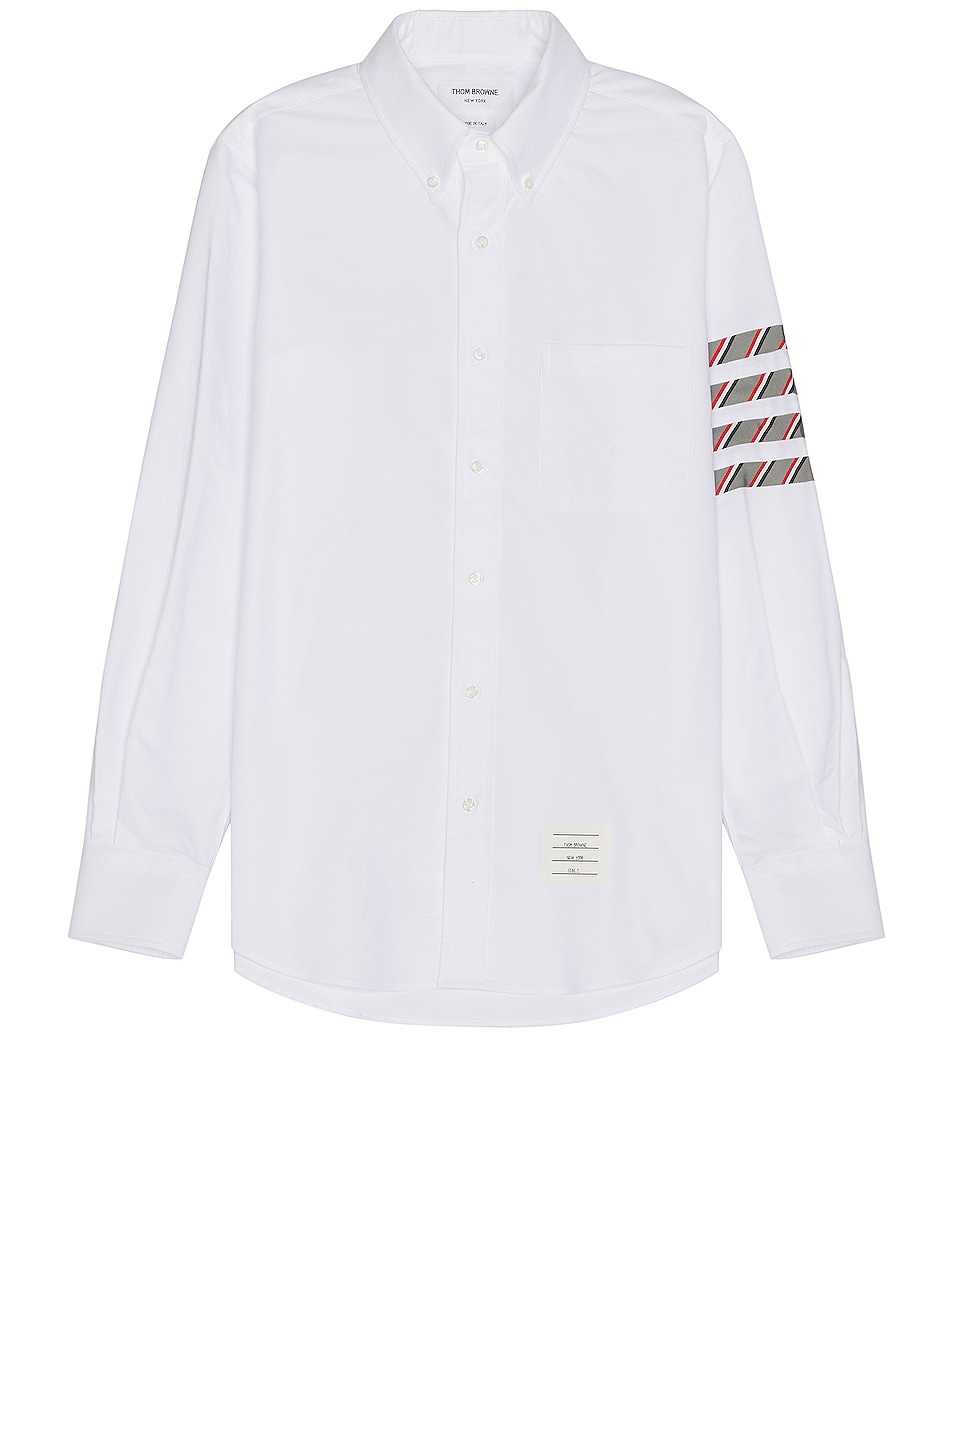 Image 1 of Thom Browne Straight Fit Shirt in Grey & White